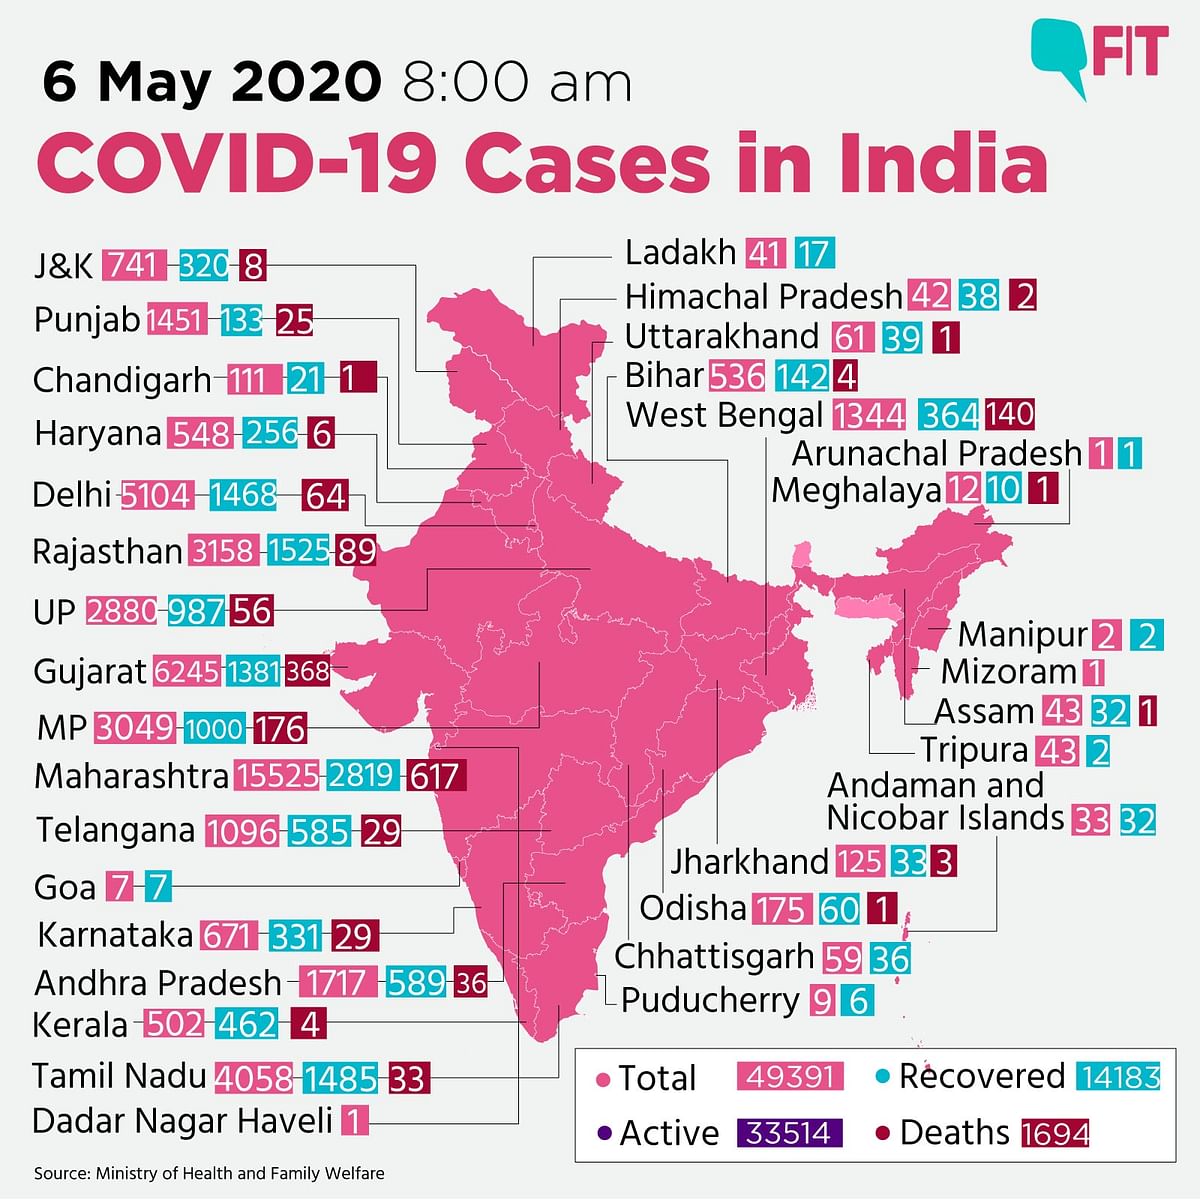 COVID-19 India Update: Cases Near 50,000, Death Toll Reaches 1,694